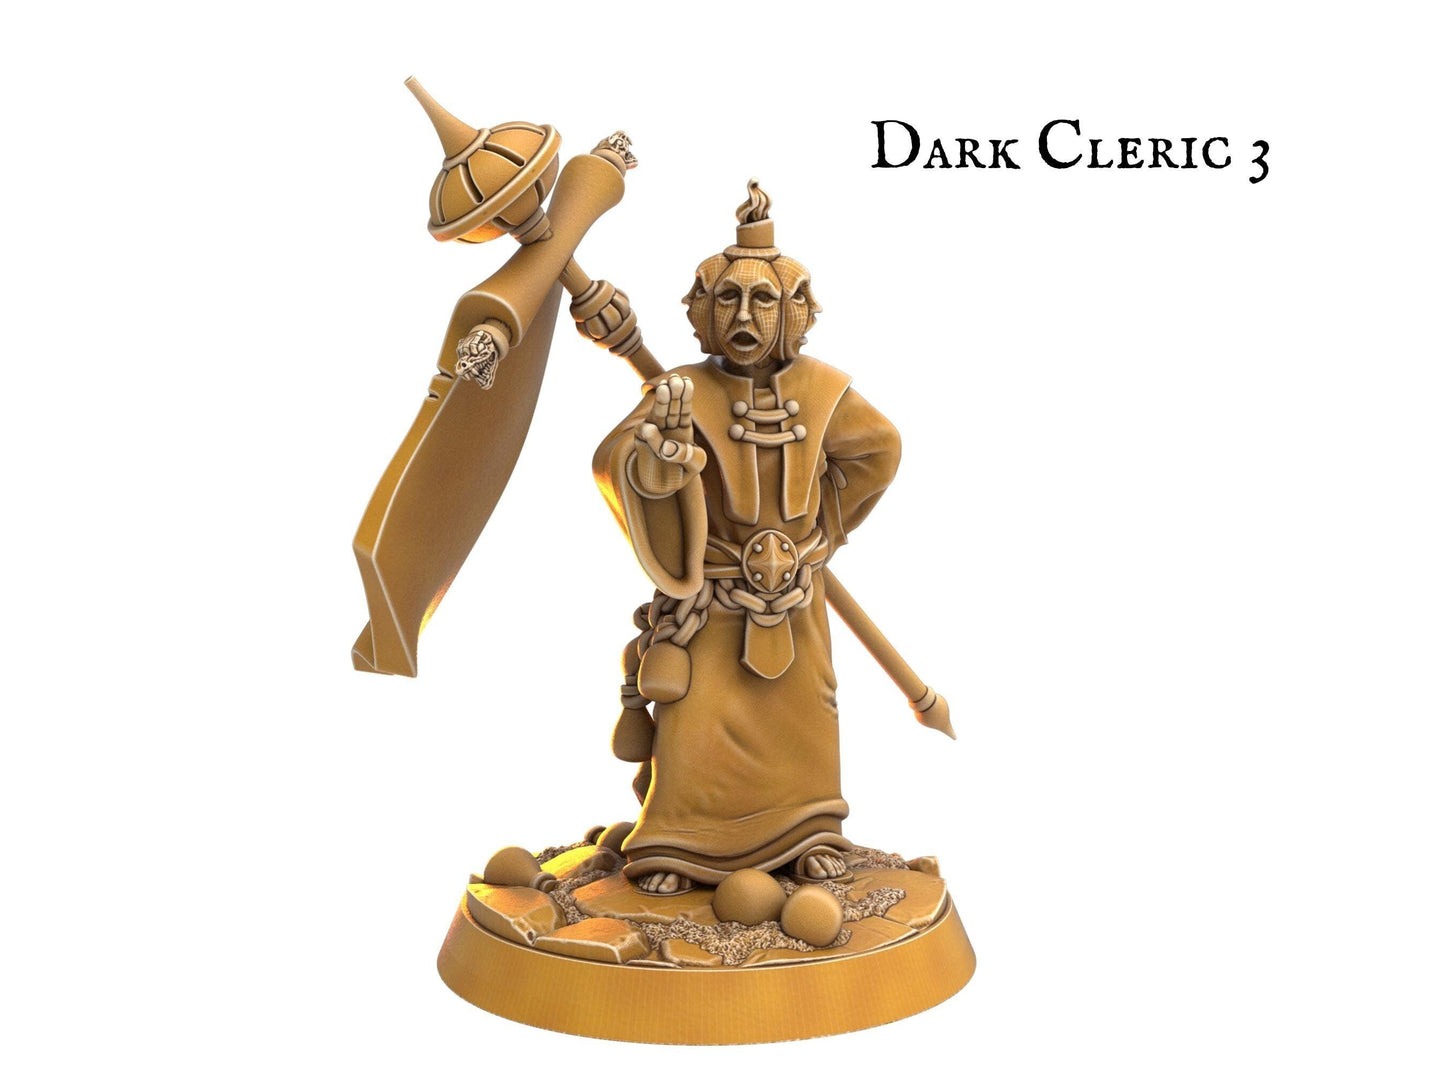 Male Dark Cleric Miniature Warlock Miniature - 5 Poses - 32mm scale Tabletop gaming DnD Miniature Dungeons and Dragons, dnd 5e - Plague Miniatures shop for DnD Miniatures